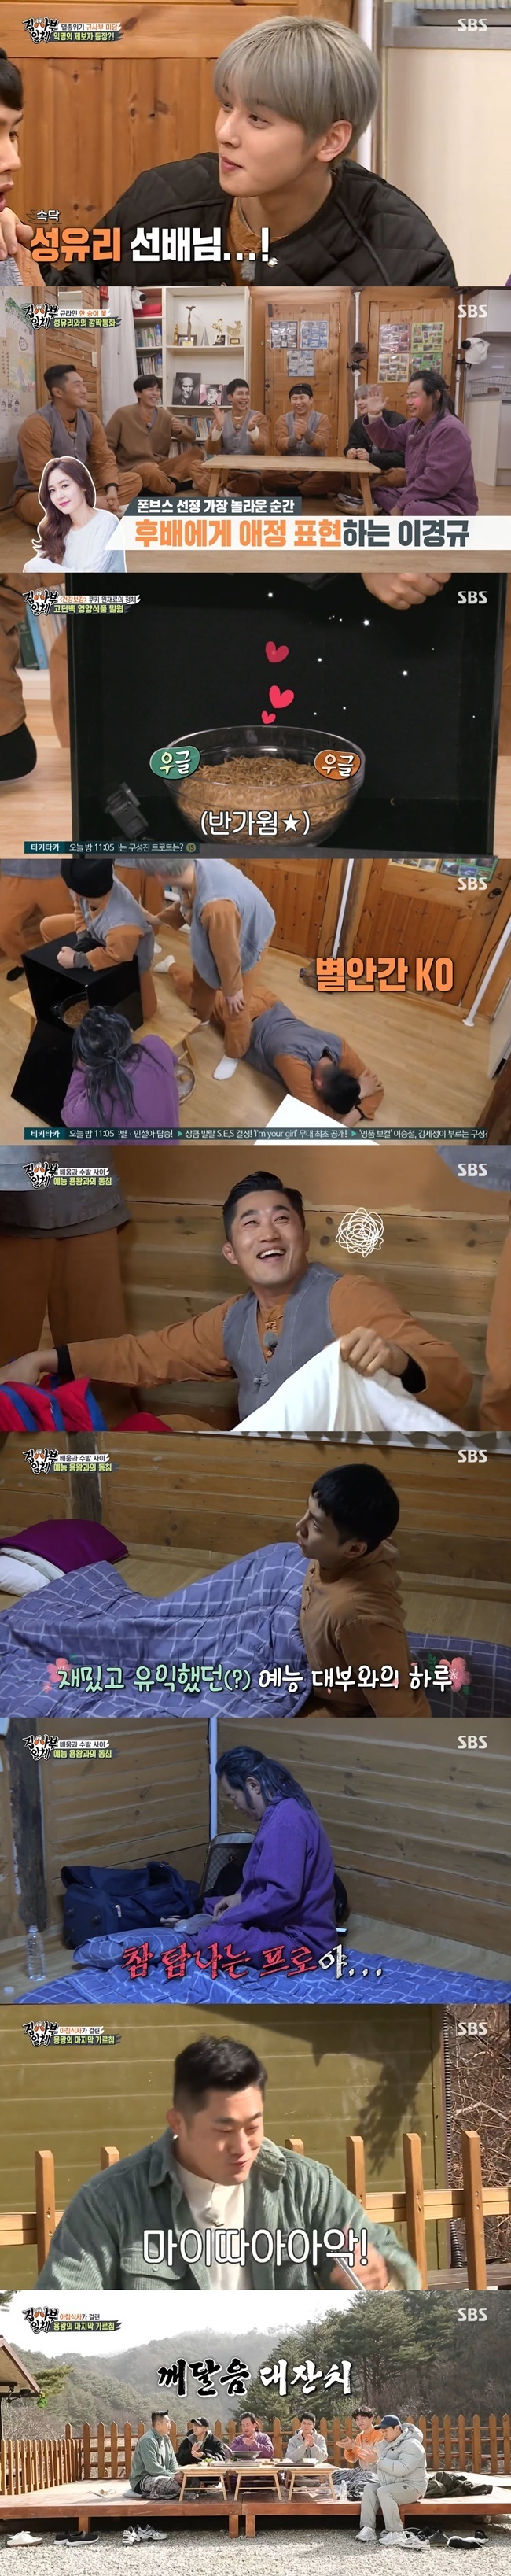 Lee Kyung-kyu showed off her entertainment The Godfather-down dedication.In SBS All The Butlers broadcast on April 11, The Godfather Lee Kyung-kyu appeared as a master and handed over 10 years of entertainment know-how to the members.On the day, the production team handed over the phone and said, There was a person who would report the misinformation of Lee Kyung-kyu.Earlier, the members went to find Lee Kyung-kyu Midam, but no one was there. Among them, an anonymous Whistle Blower appeared and attracted attention.The identity of the Whistle Blower was Finkle Sung Yu-ri, who had a relationship with Lee Kyung-kyu in the past on SBS Healing Camp: One World.Sung Yu-ri said, Lee Kyung-kyu is on the outside and produces a bad image, but in fact, it is a dread. If the female guests or female MCs come, they can not meet their eyes and just run away.However, Yang Se-hyeong responded with a nervous response, Is that Midam?In addition, Sung Yu-ri said, Did not you do Healing Camp: One World with Han Hye-jin before?My senior always said, I know only two female entertainers, Yuri and Hyejin, and then I entertained with Kim Min-jung and said, I do not know who Sung Yu-ri is.Lee Kyung-kyu said, I love you.Lee Kyung-kyu, who failed to manufacture the mitam, started to catch the characters of the members.Lee Kyung-kyu, who emphasized the importance of Chain Reaction above all, tried to make Kim Dong-Hyun a stop character, but he said he was stop in the year.Eventually Lee Kyung-kyu begged Kim Dong-Hyun for stupidThe next corner was Health Watch. Lee Kyung-kyu proceeded to the corner and fed cookies naturally to the members, even Cha Eun-woo took a break to snack.But the cookie was a millworm: Kim Dong-Hyun, who identified the millworm, burst into tears while lying on the floor.In response, Lee Kyung-kyu explained: Its a millworm, a food source certified by the Food and Drug Administration; 2.5 times the protein of beef.For the final training session, Lee Kyung-kyu let Lee Seung-gi into the room; Lee Seung-gi, who entered alone, groaned abruptly.Kim Dong-Hyun laughed, saying, What is this? Is it broadcast? The sound is so strange.Yang Se-hyeong speculated, It sounds like Im hearing this when its so sick.The members were left to the hands of director Koo Dong-myeong, who had been managing muscle pain for 26 years.This was Lee Kyung-kyus character in the Chain Reaction training car, who thanked Lee Seung-gi for being too light in body.Ahead of his bedtime, Lee Kyung-kyu said, I will give only one person the privilege to sleep with me, to take my hair. I am sick.Lee Seung-gi suggested, Everyone is in a hurry to take a handbag now, so fierce that I want to pick one through the game.The main character of the fugitive after the cushion fight was Lee Seung-gi.It was so informative to meet the Master today, Lee Seung-gi said.Lee Kyung-kyu confessed, In fact, I do not do Chain Reaction well.Lee Kyung-kyu said, It is a coveted program of All The Butlers.